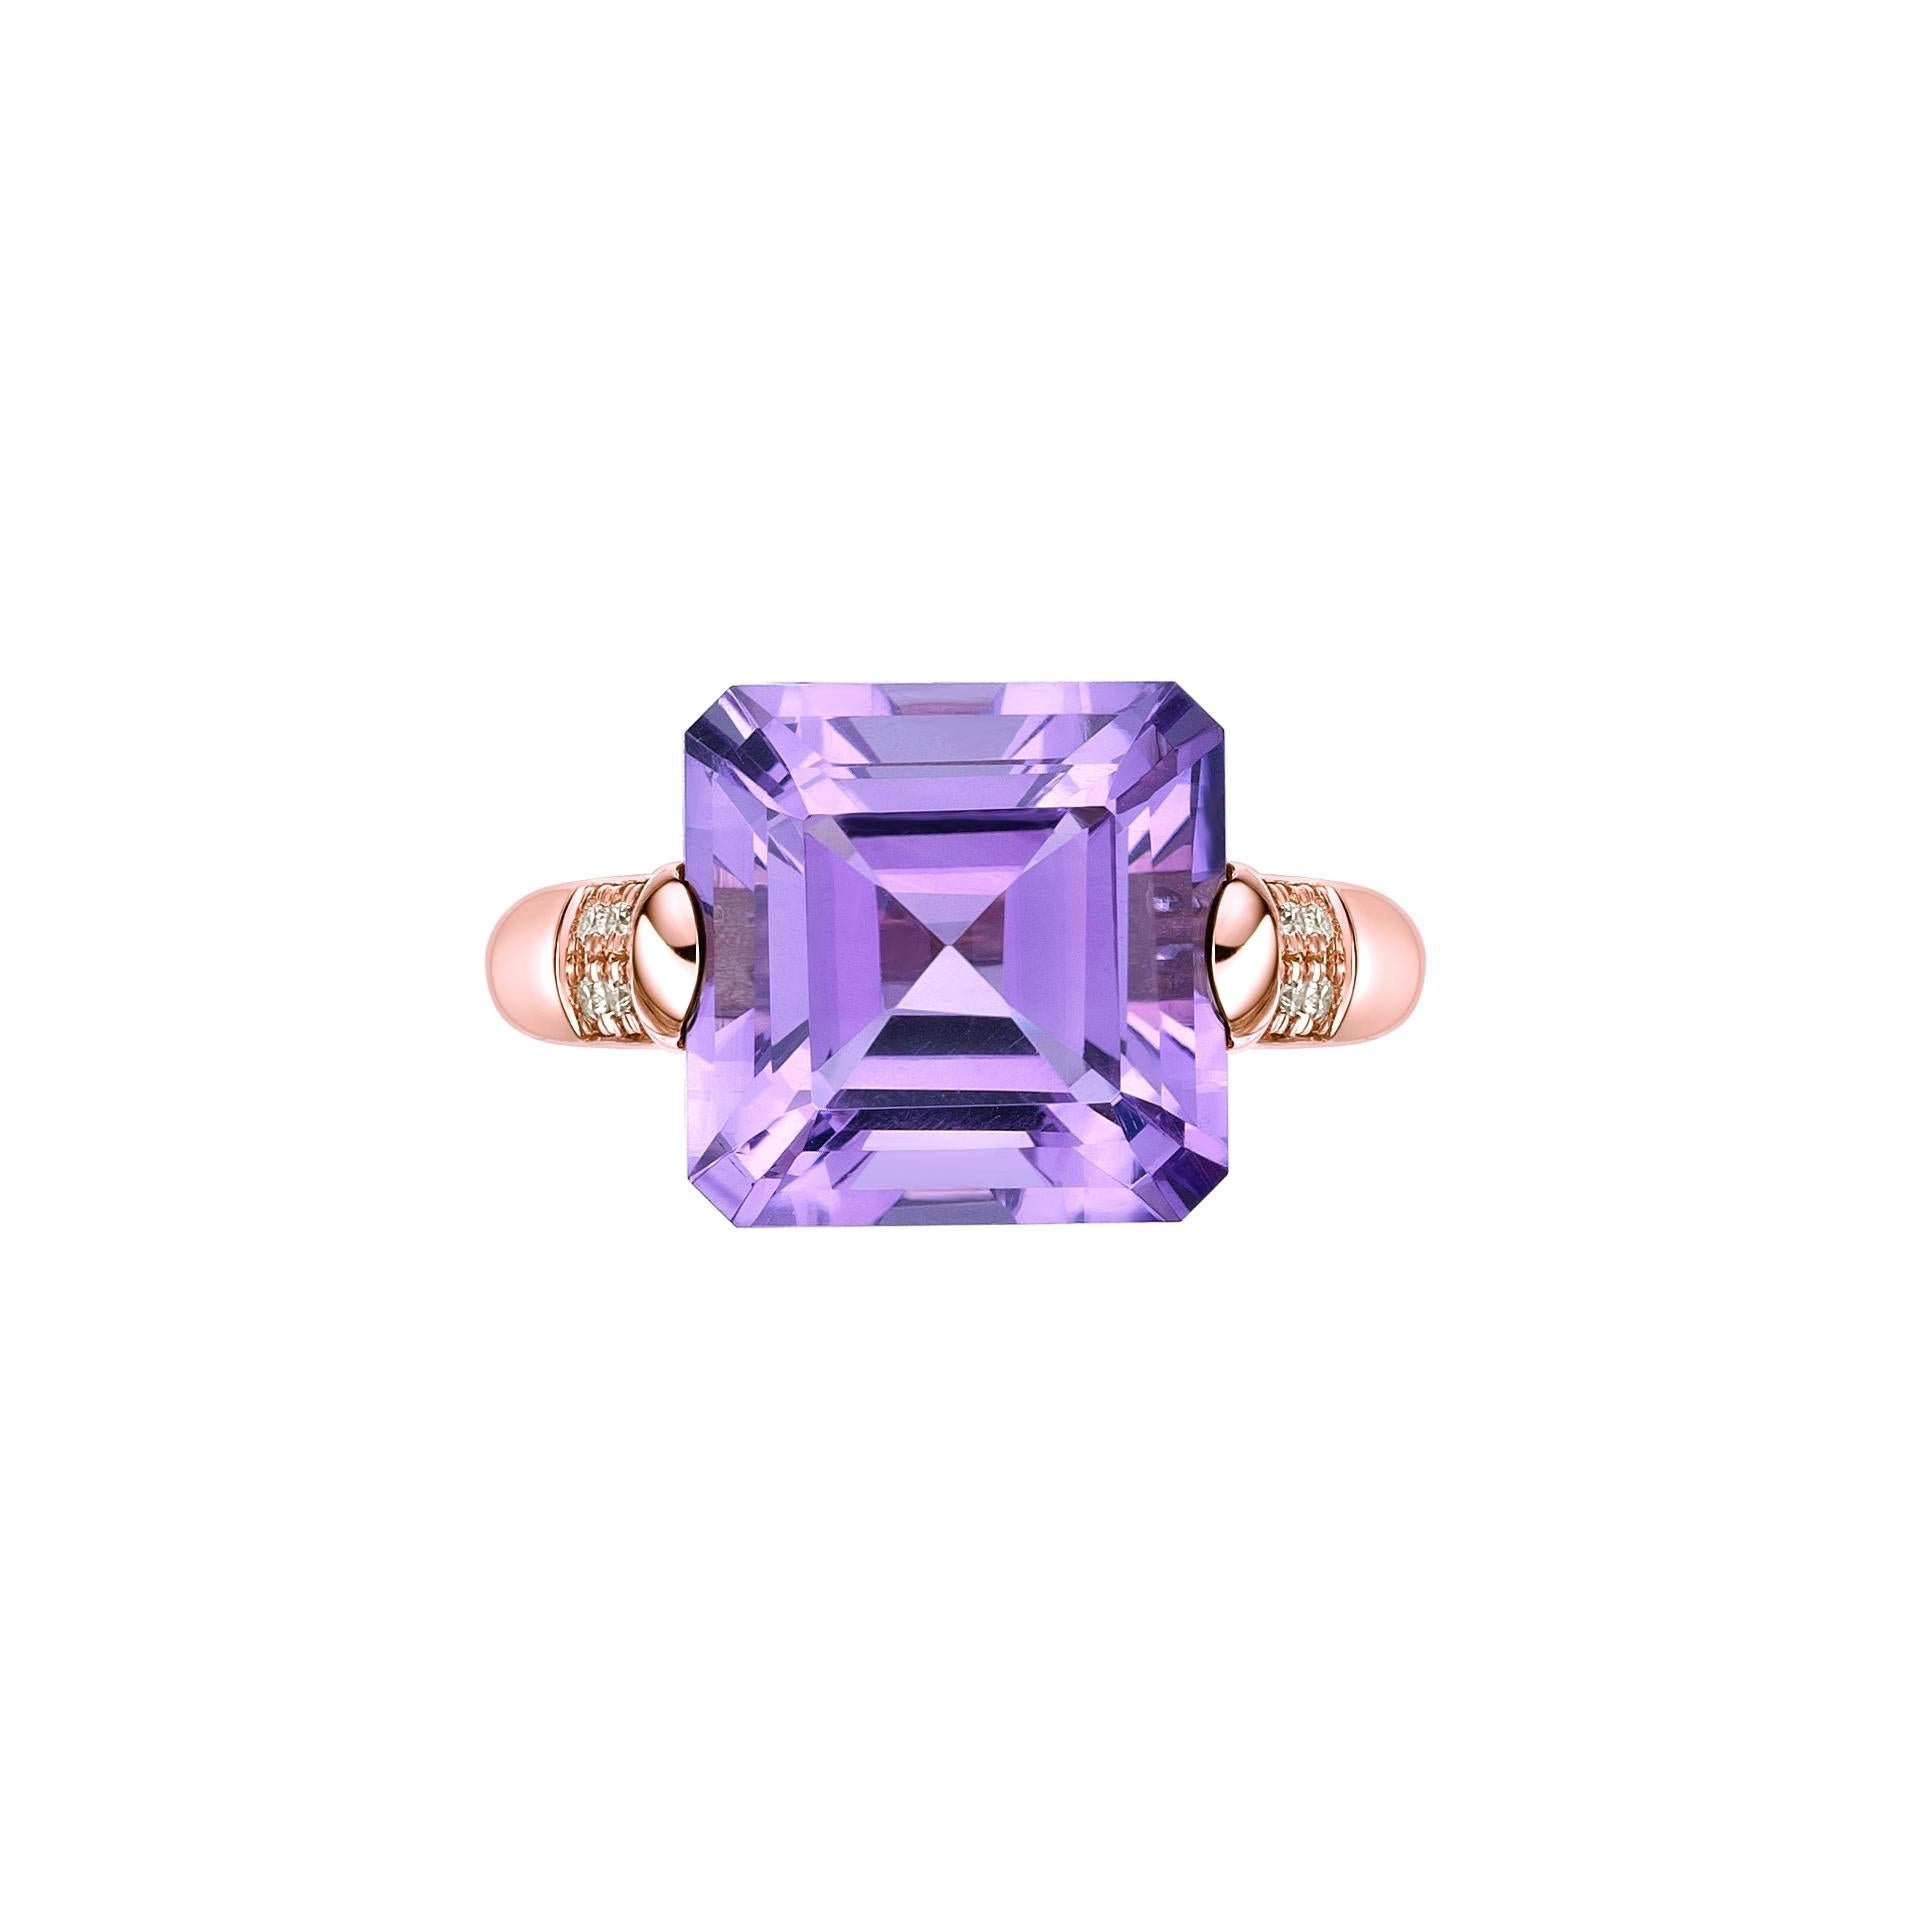 Contemporary 7.97 Carat Amethyst Fancy Ring in 18Karat Rose Gold with White Diamond. For Sale